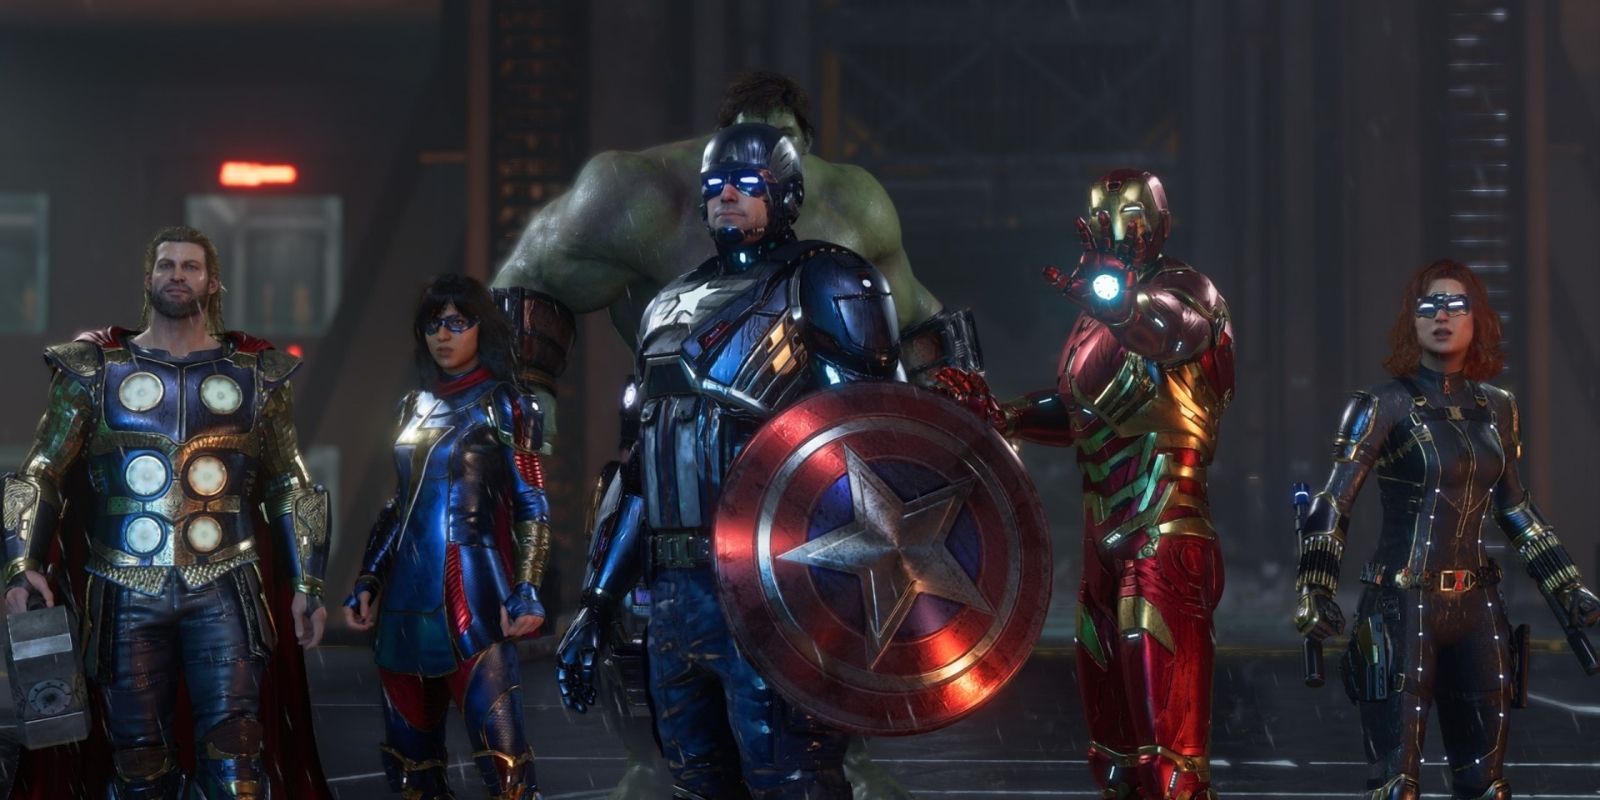 The Avengers, many sporting metallic armor, in Crystal Dynamics game